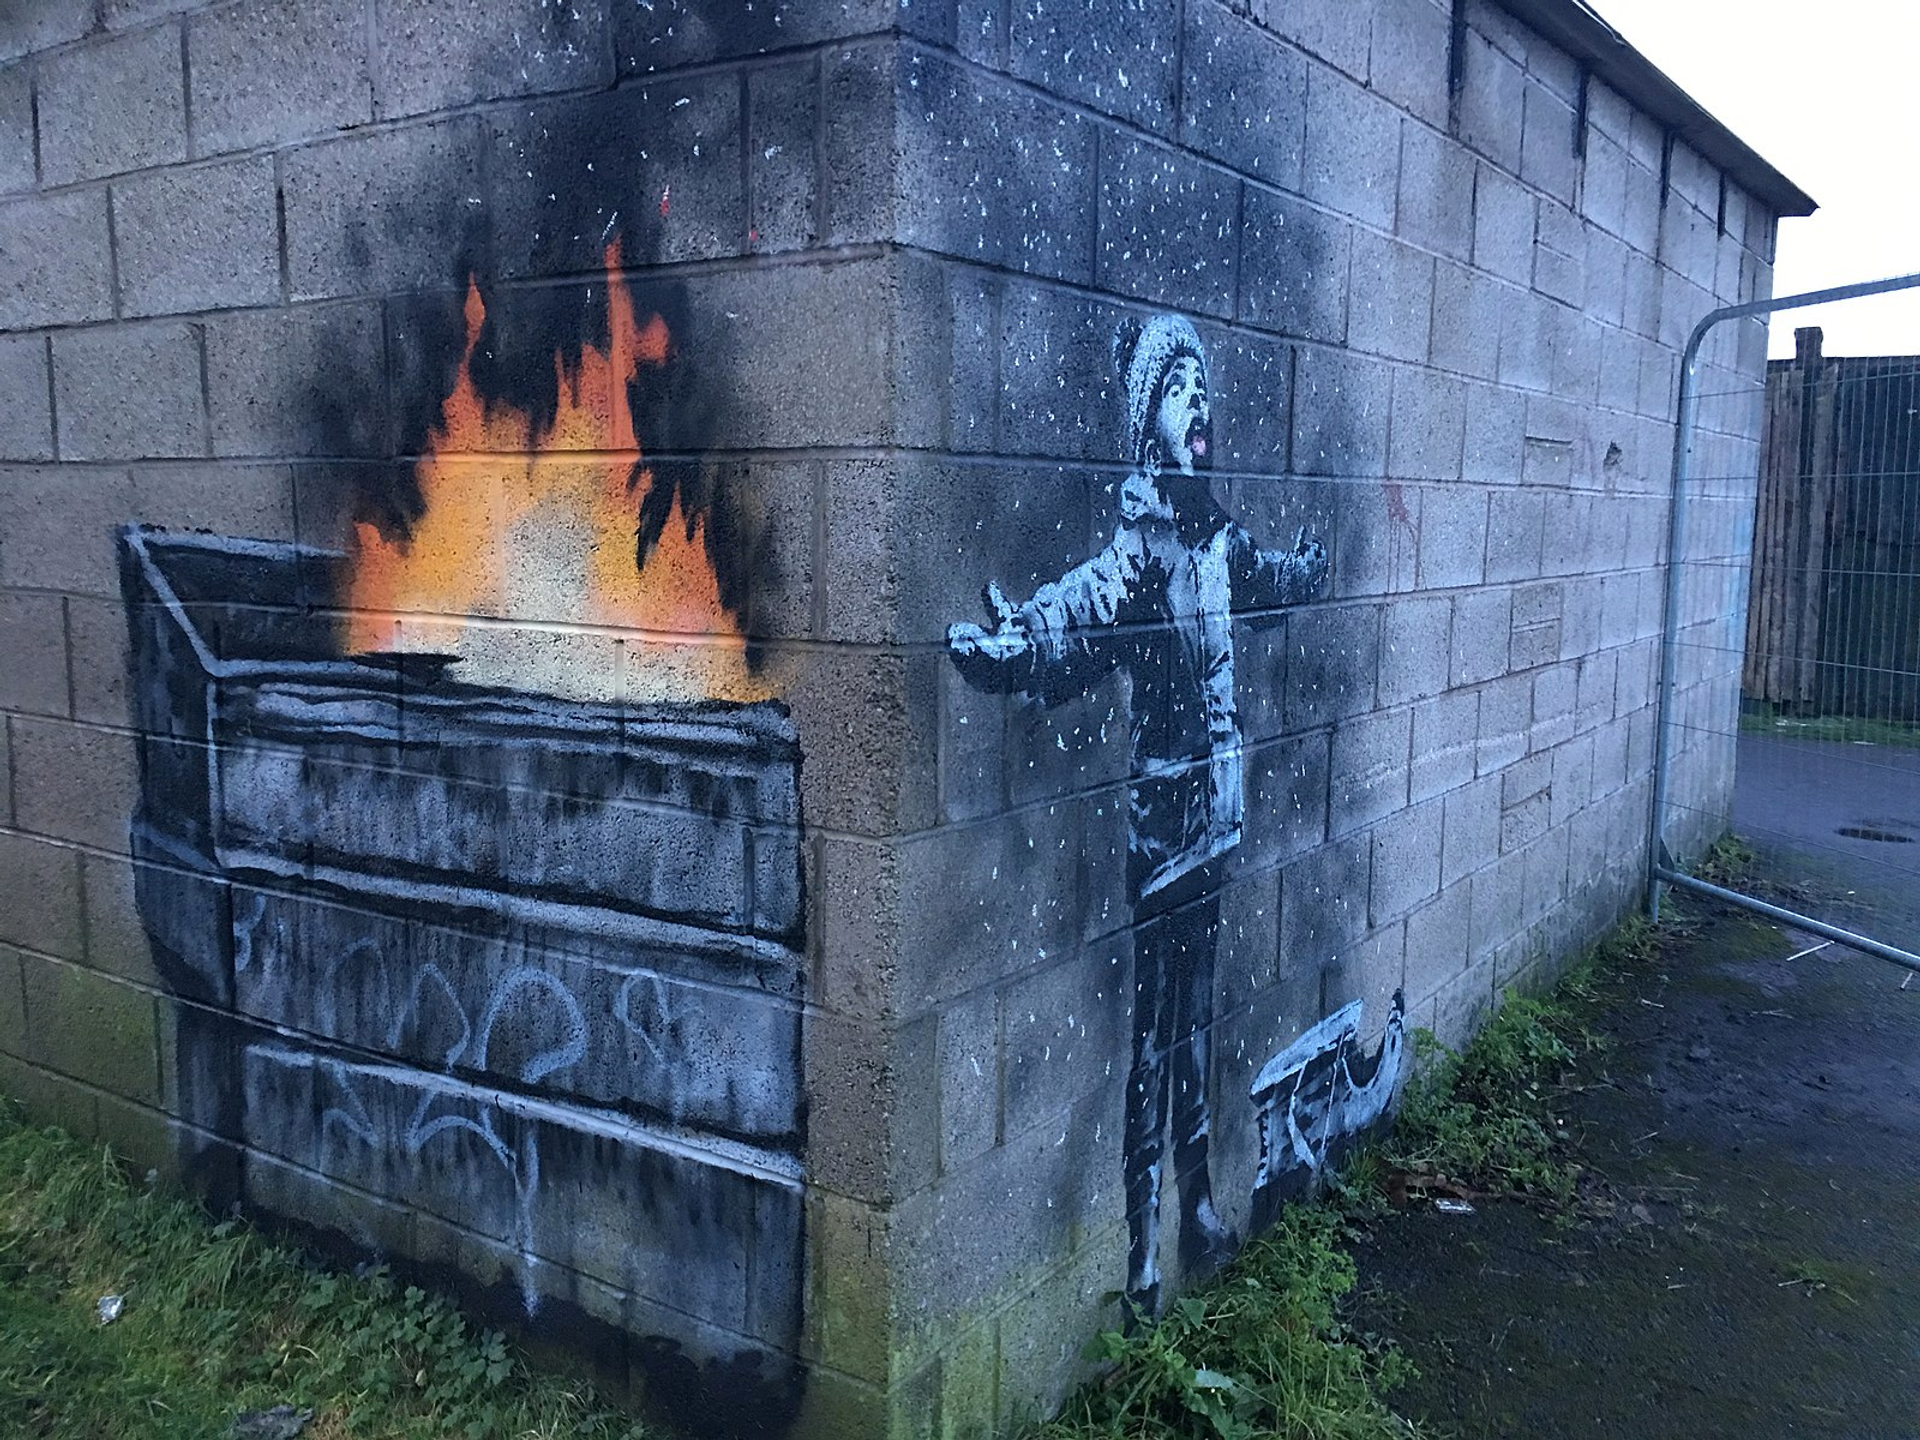 This work by Banksy is done at the corner of a building; one side shows a burning dumpster, while the other shows a happy young boy playing in the resulting ashes.